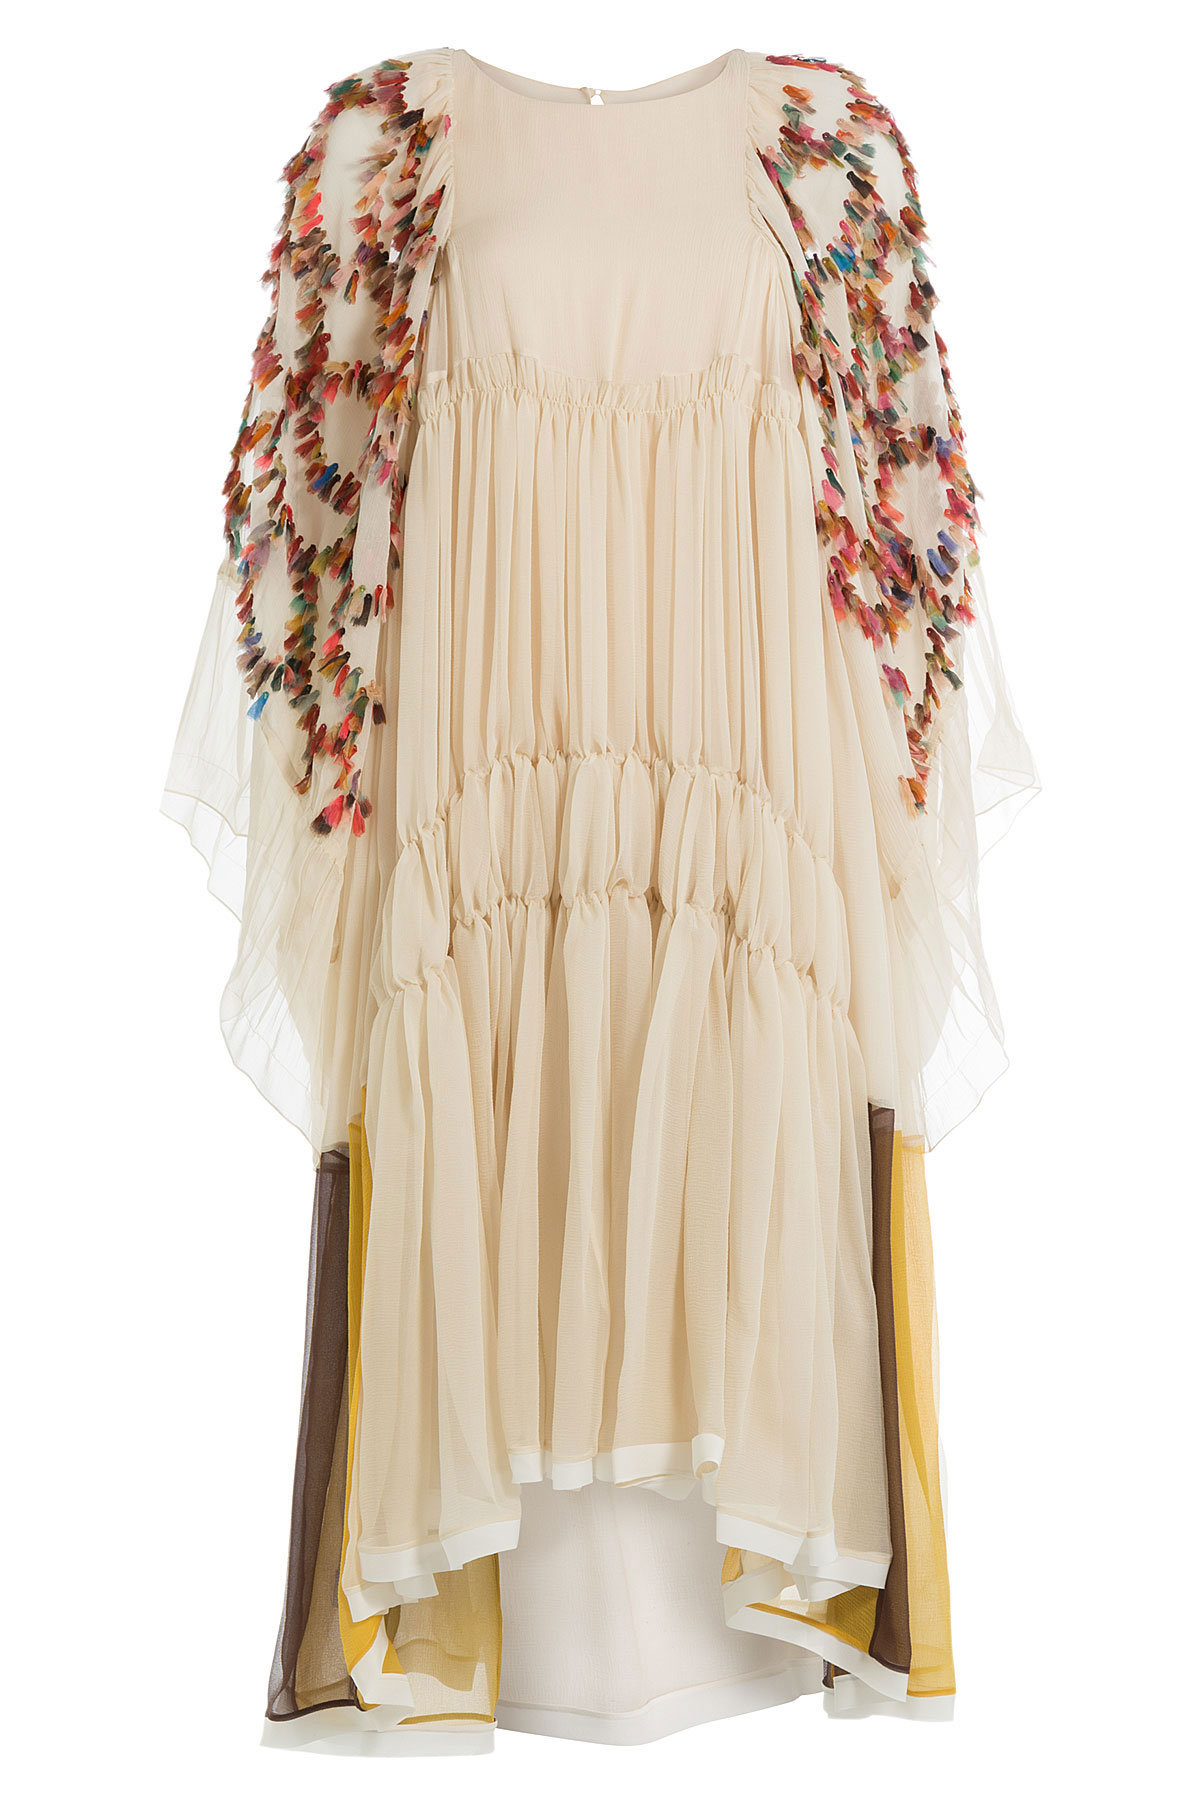 Chloe - Chiffon Dress with Multicolored Details